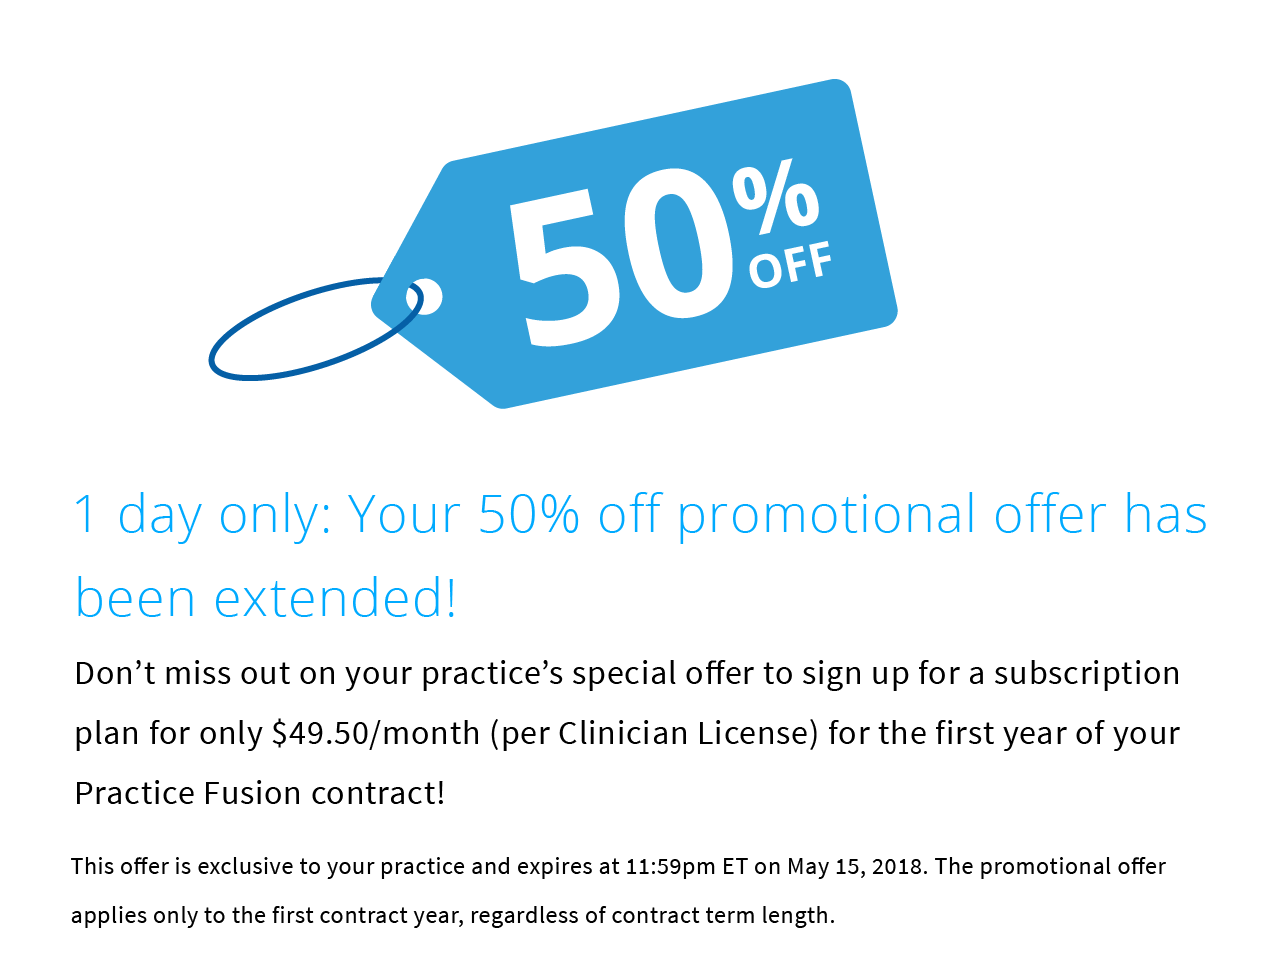 Don't miss out on your practice's special offer to sign up for a subscription plan for only $49.50/month (per Clinician License) for the first year of your Practice Fusion contract!